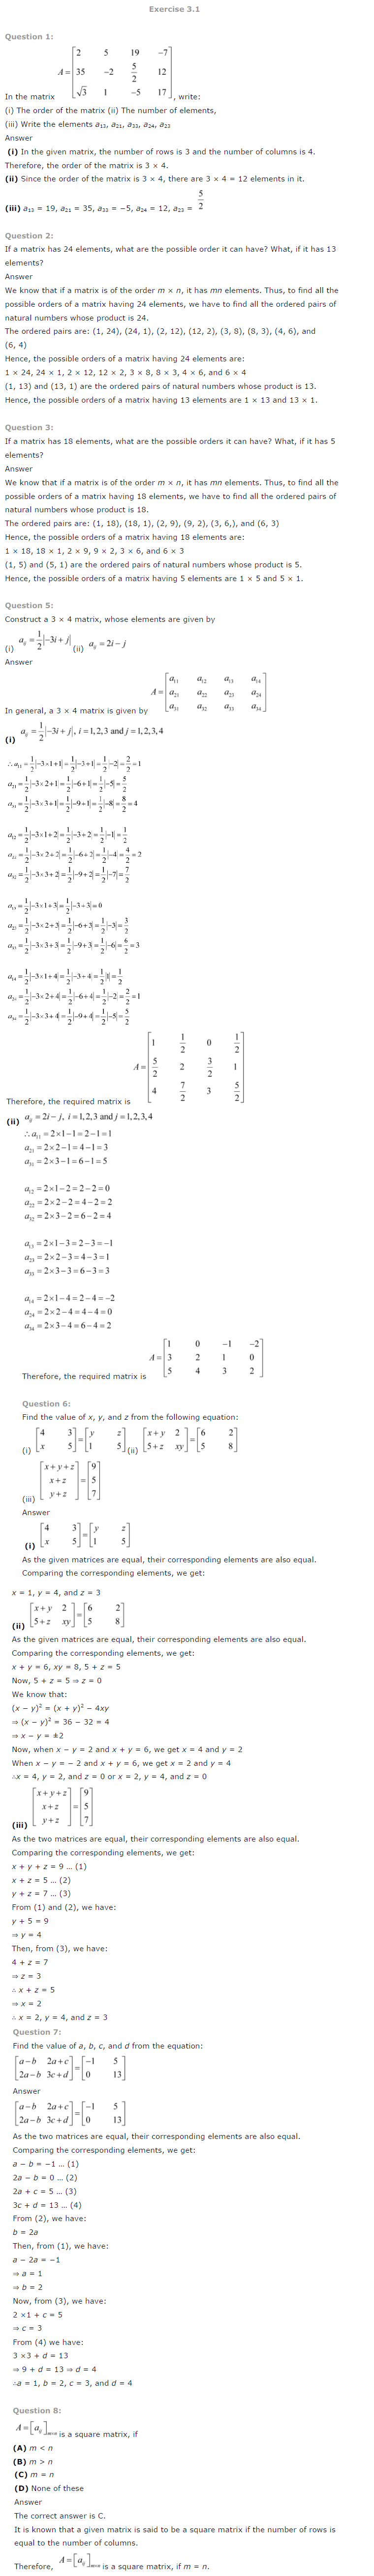 NCERT Solutions for Class 12 Maths Chapter 3 Matrices